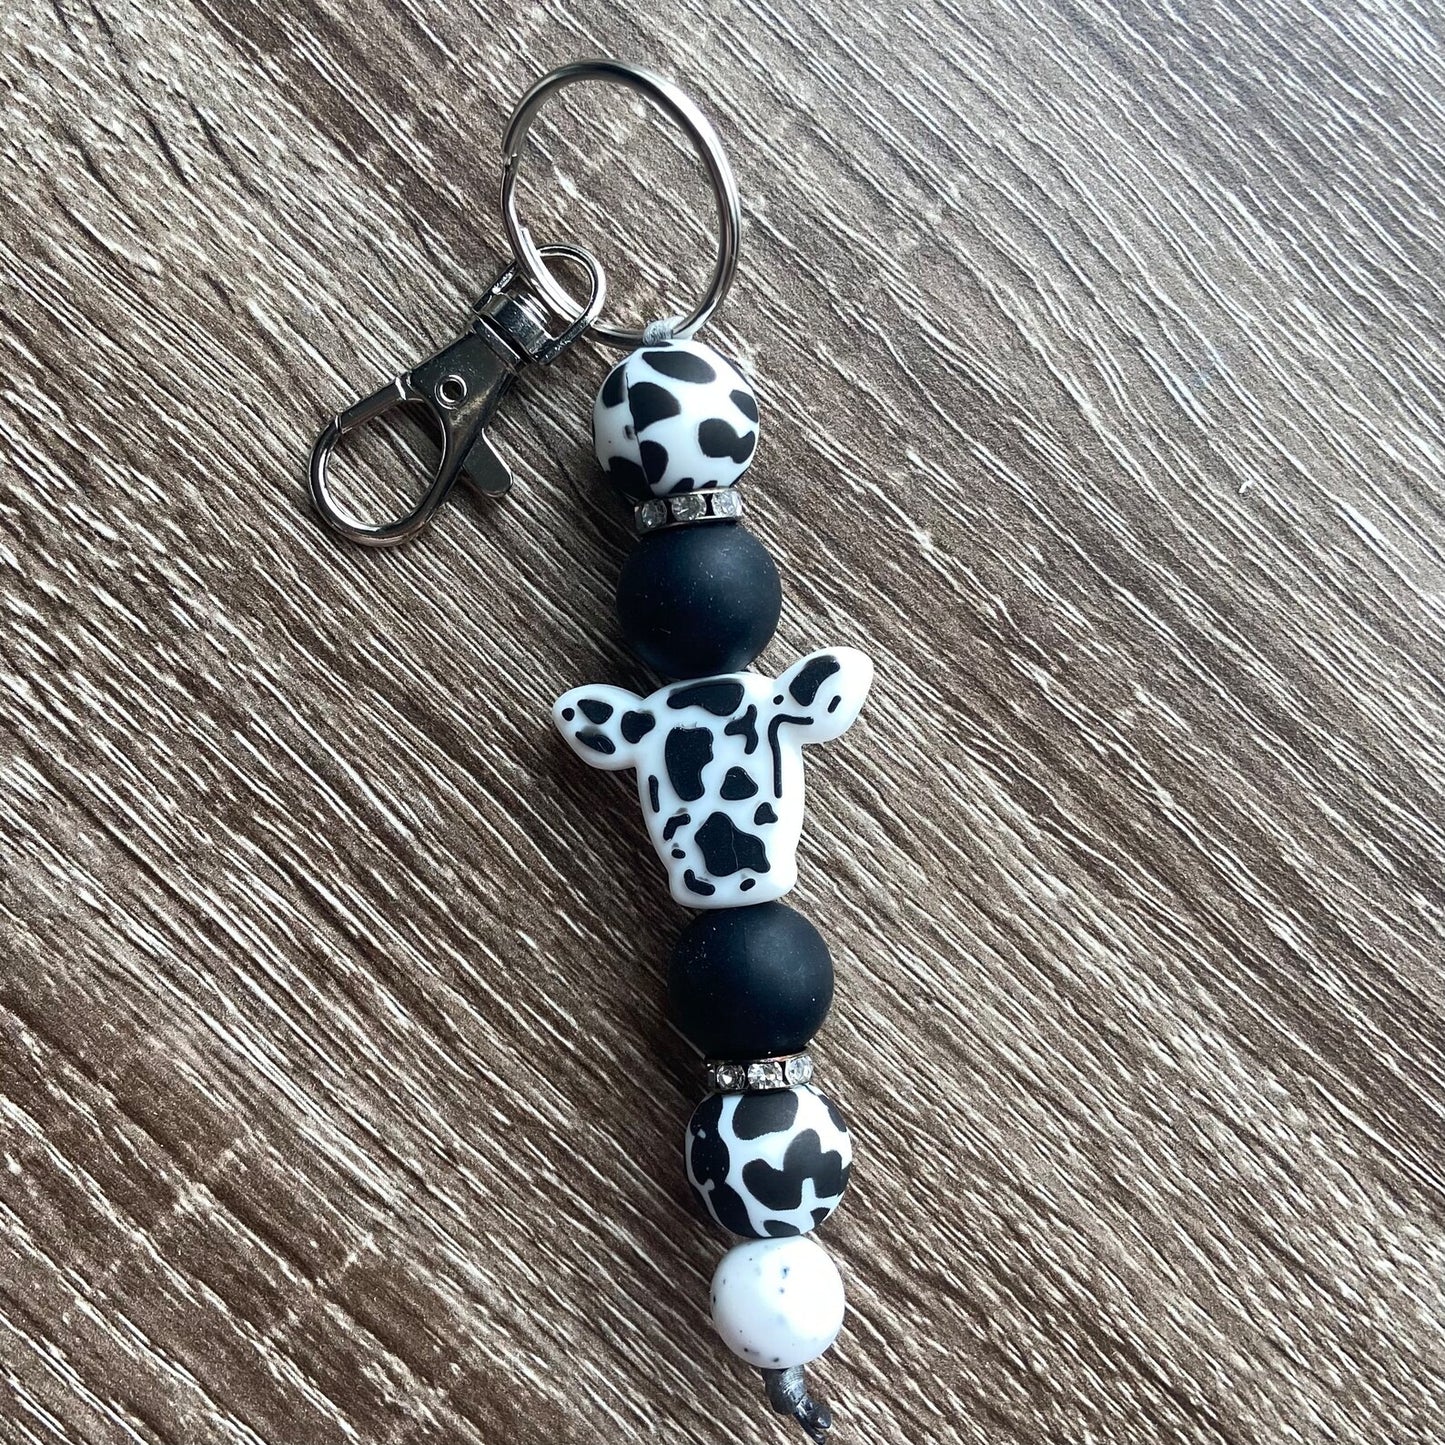 Teal, Black, or Pink Cow Keychain